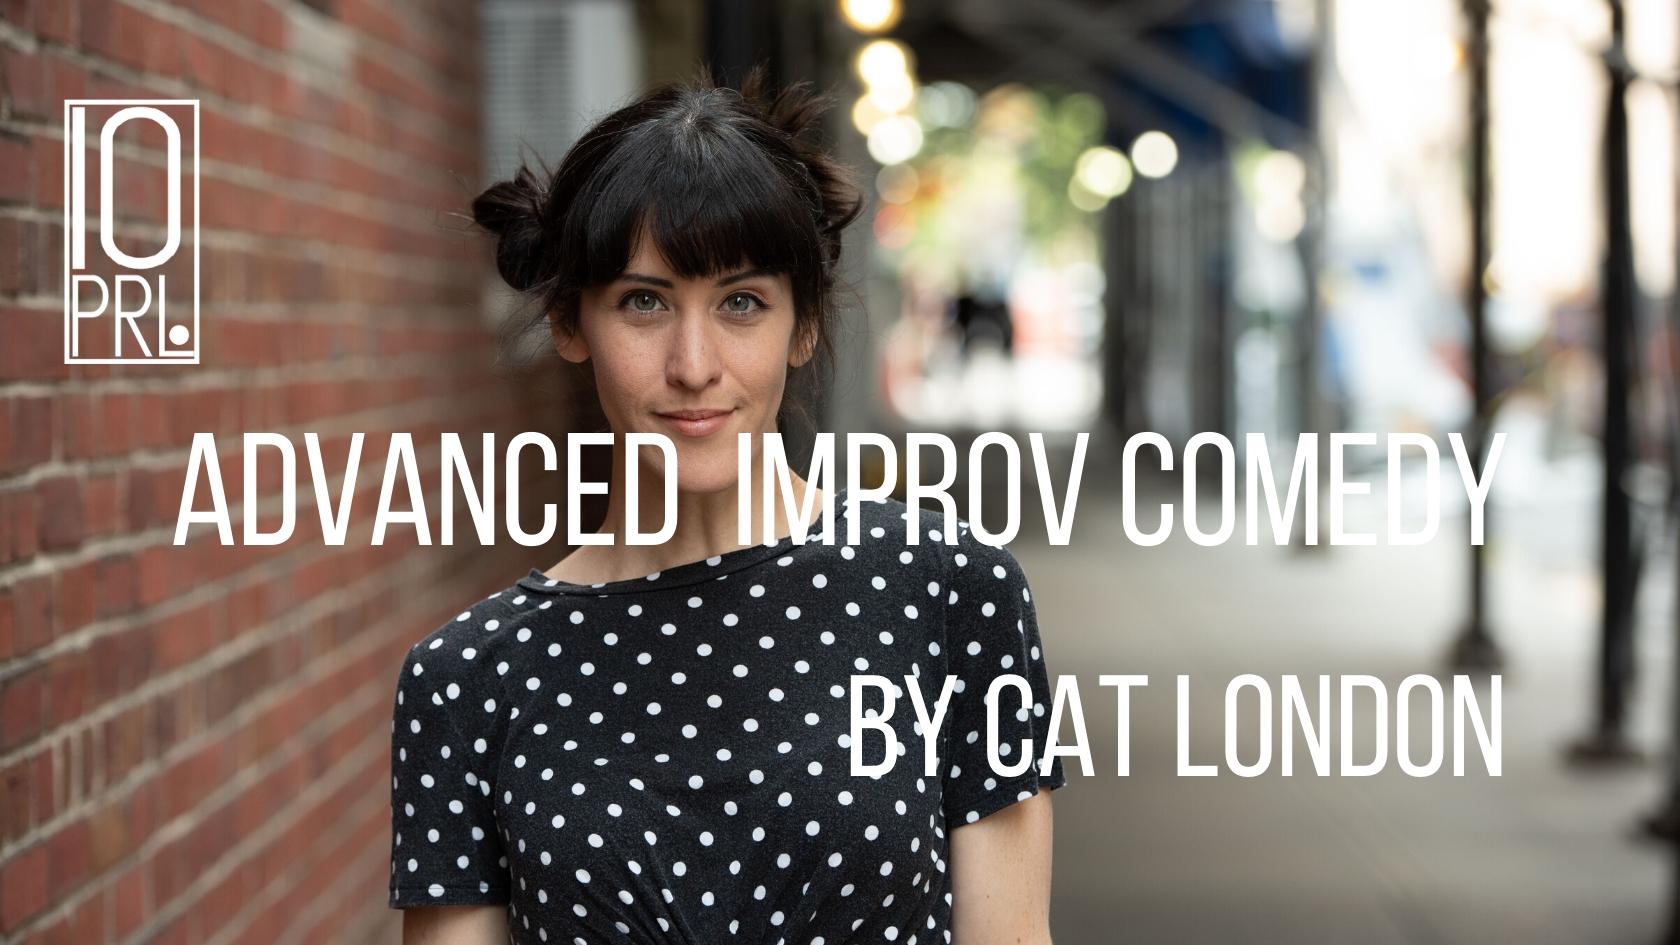 Advanced Comedy Improv Class with Cat London at 10PRL